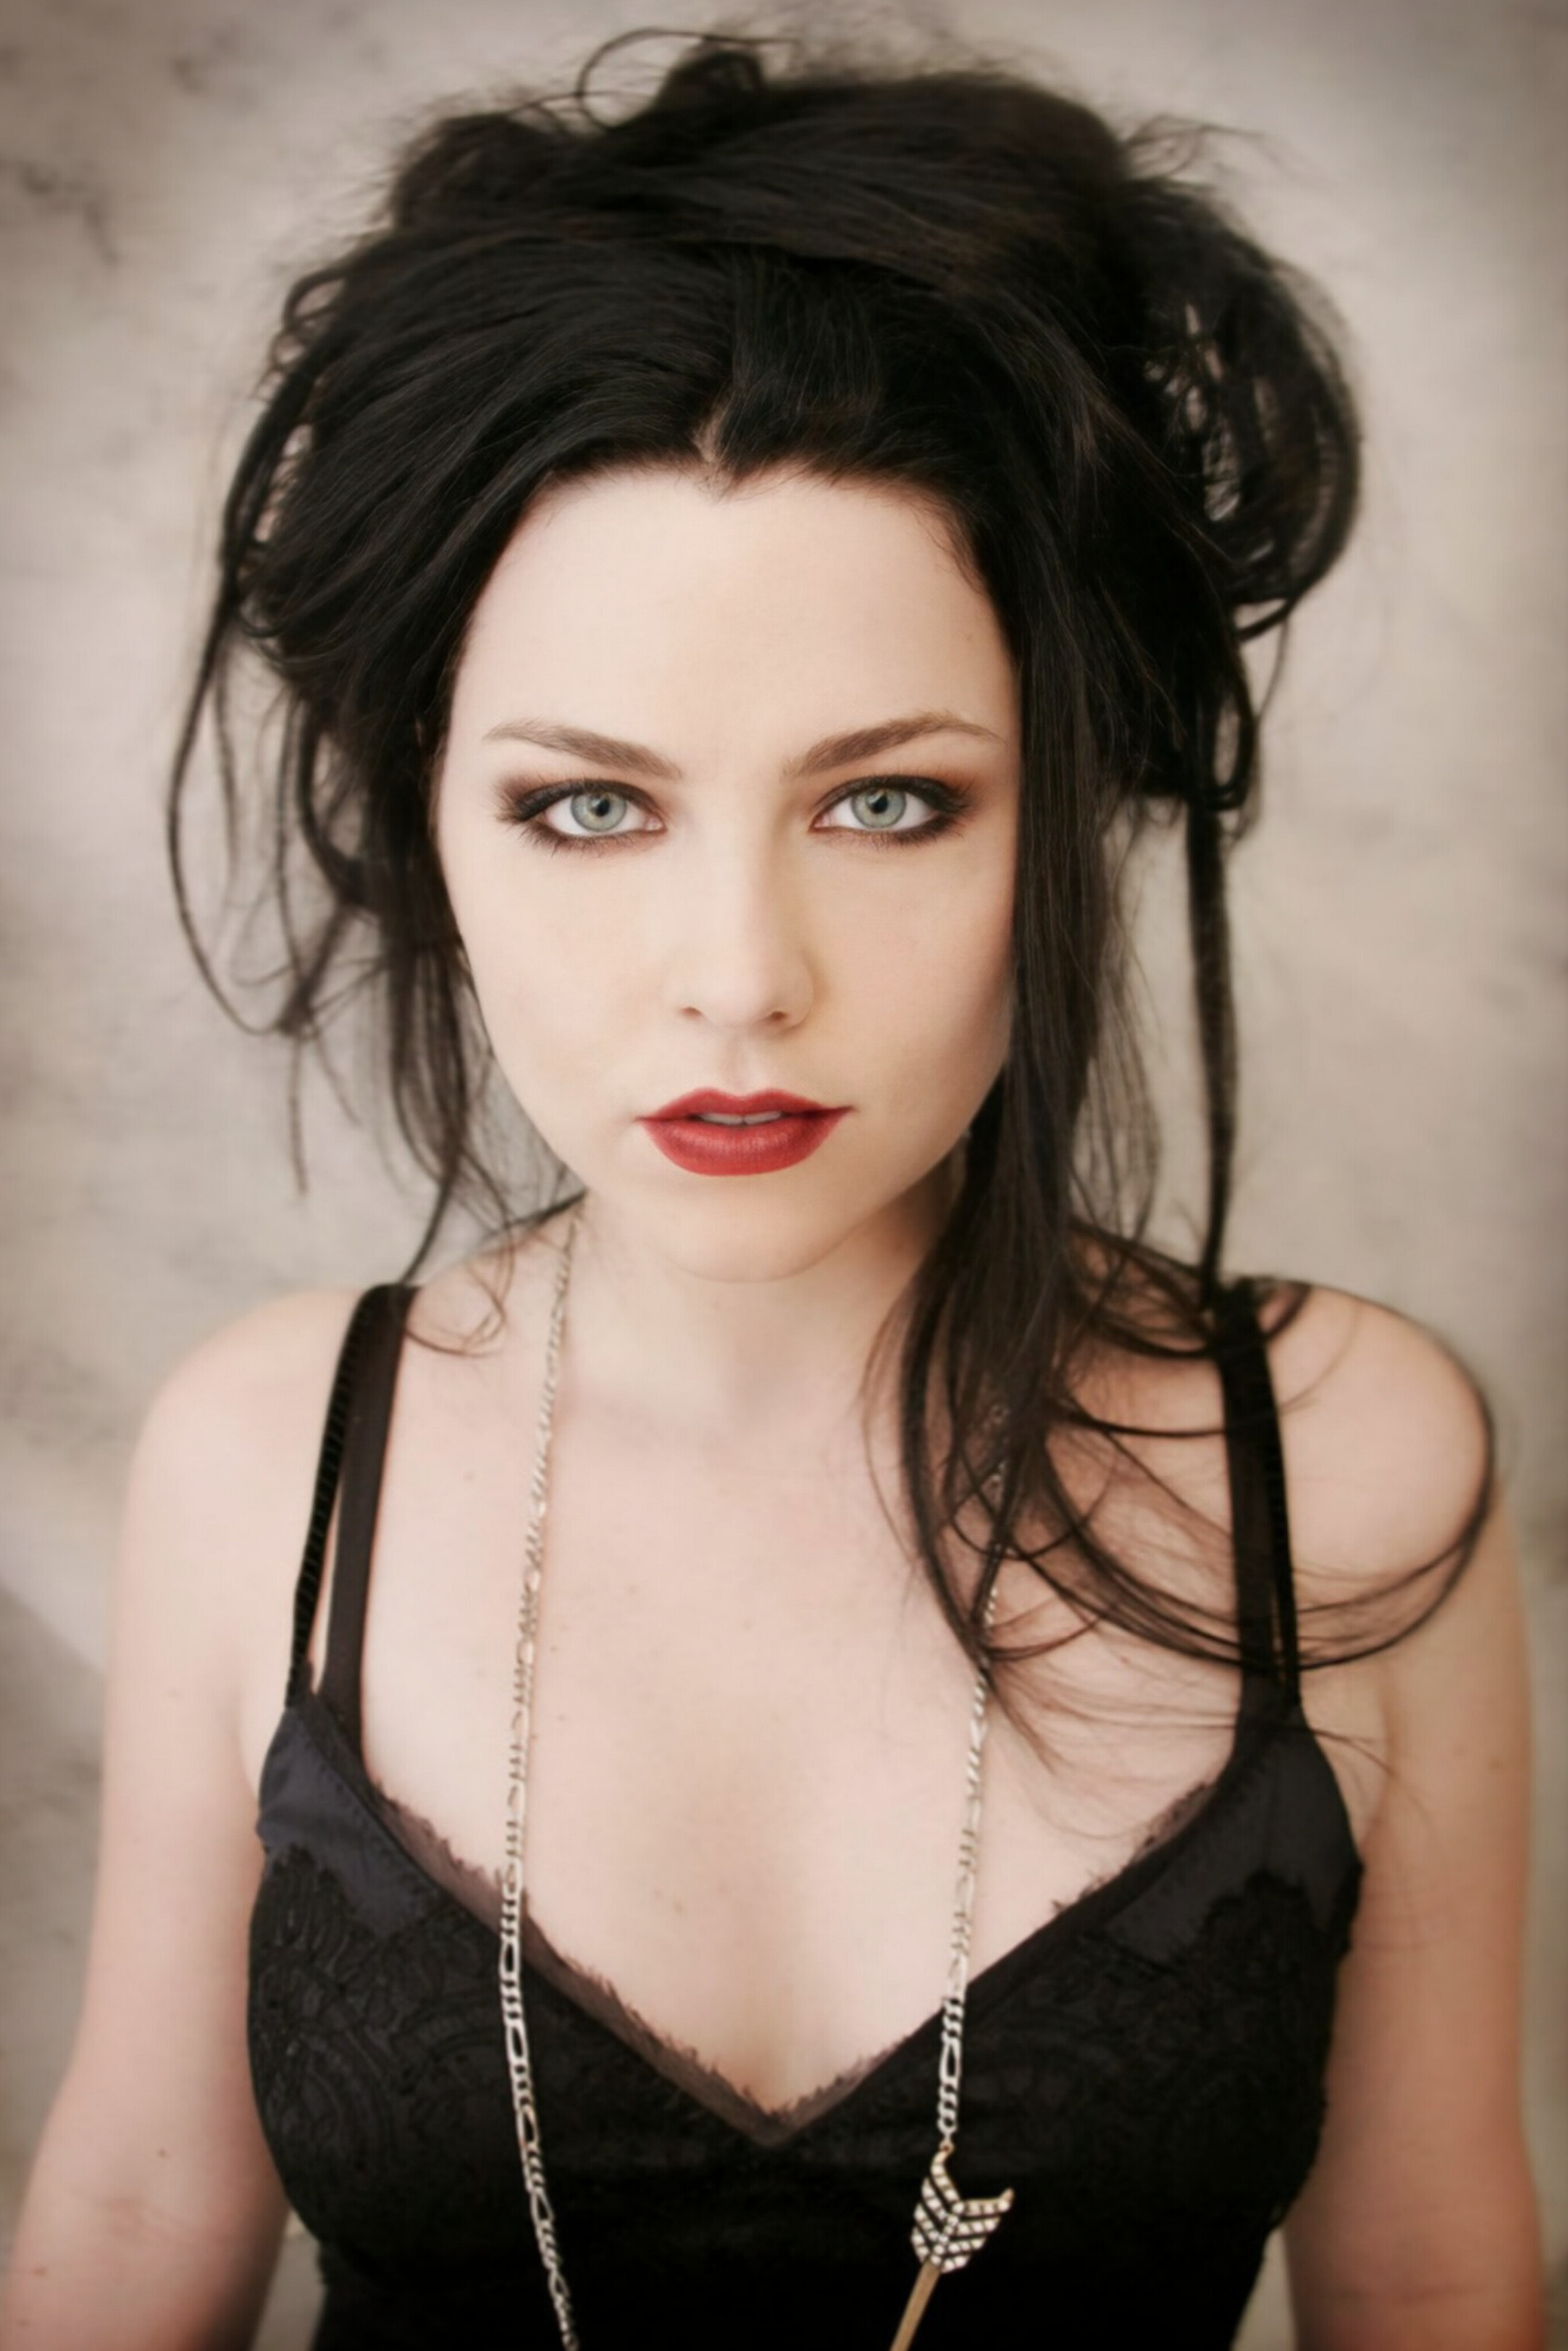 2732x4096
Keywords: amy lee;hq;photoshoot;the open door;2006;sesion